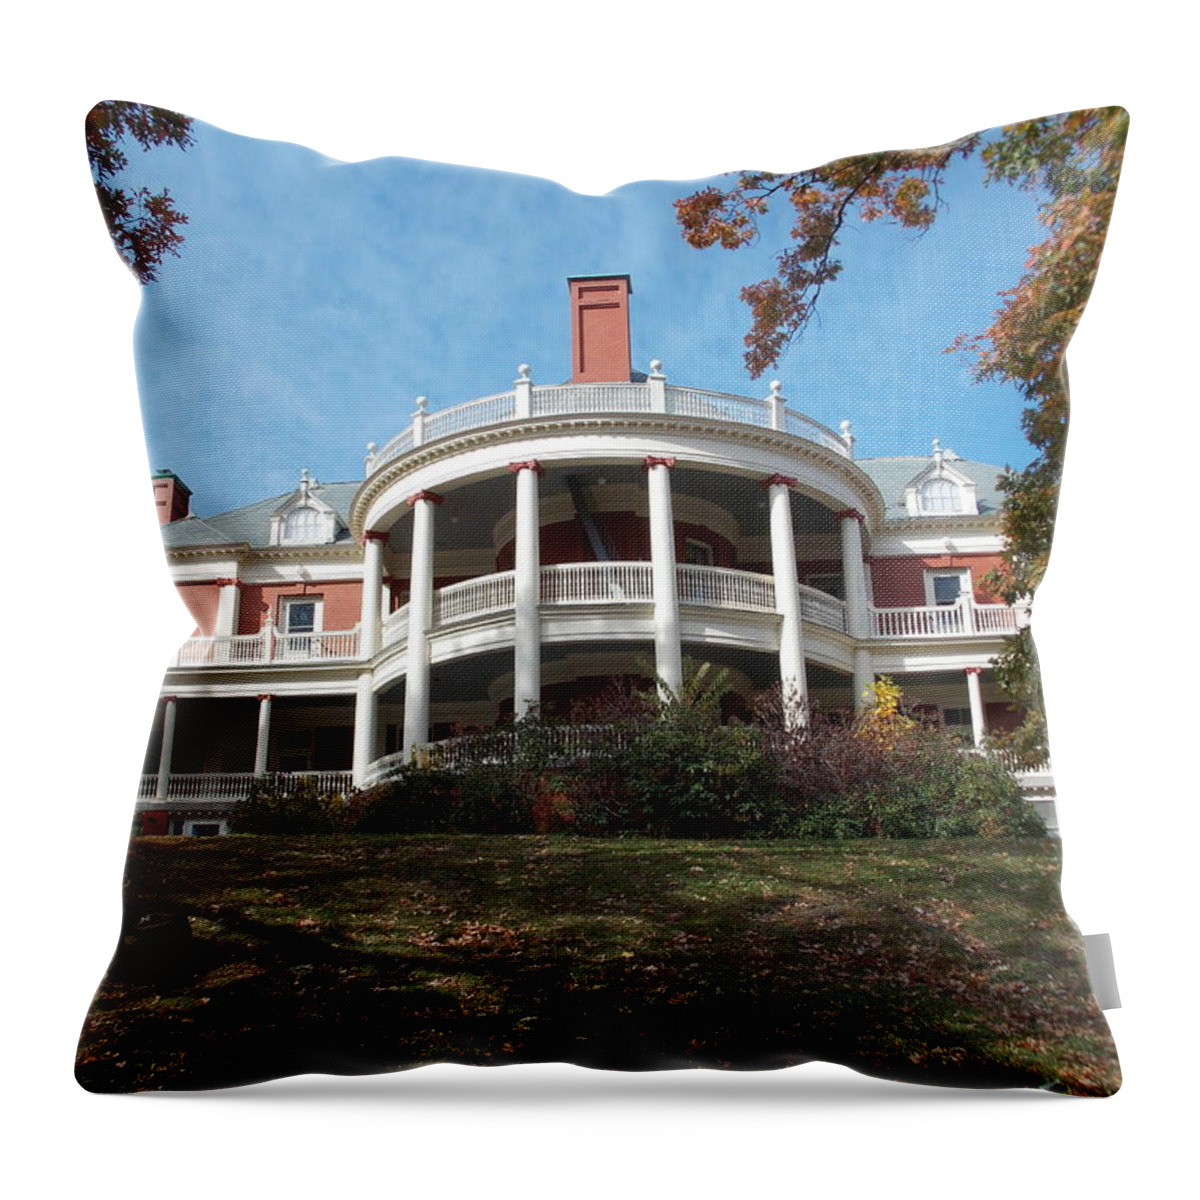 Roger Williams Throw Pillow featuring the photograph Roger Williams Park Casino by Catherine Gagne